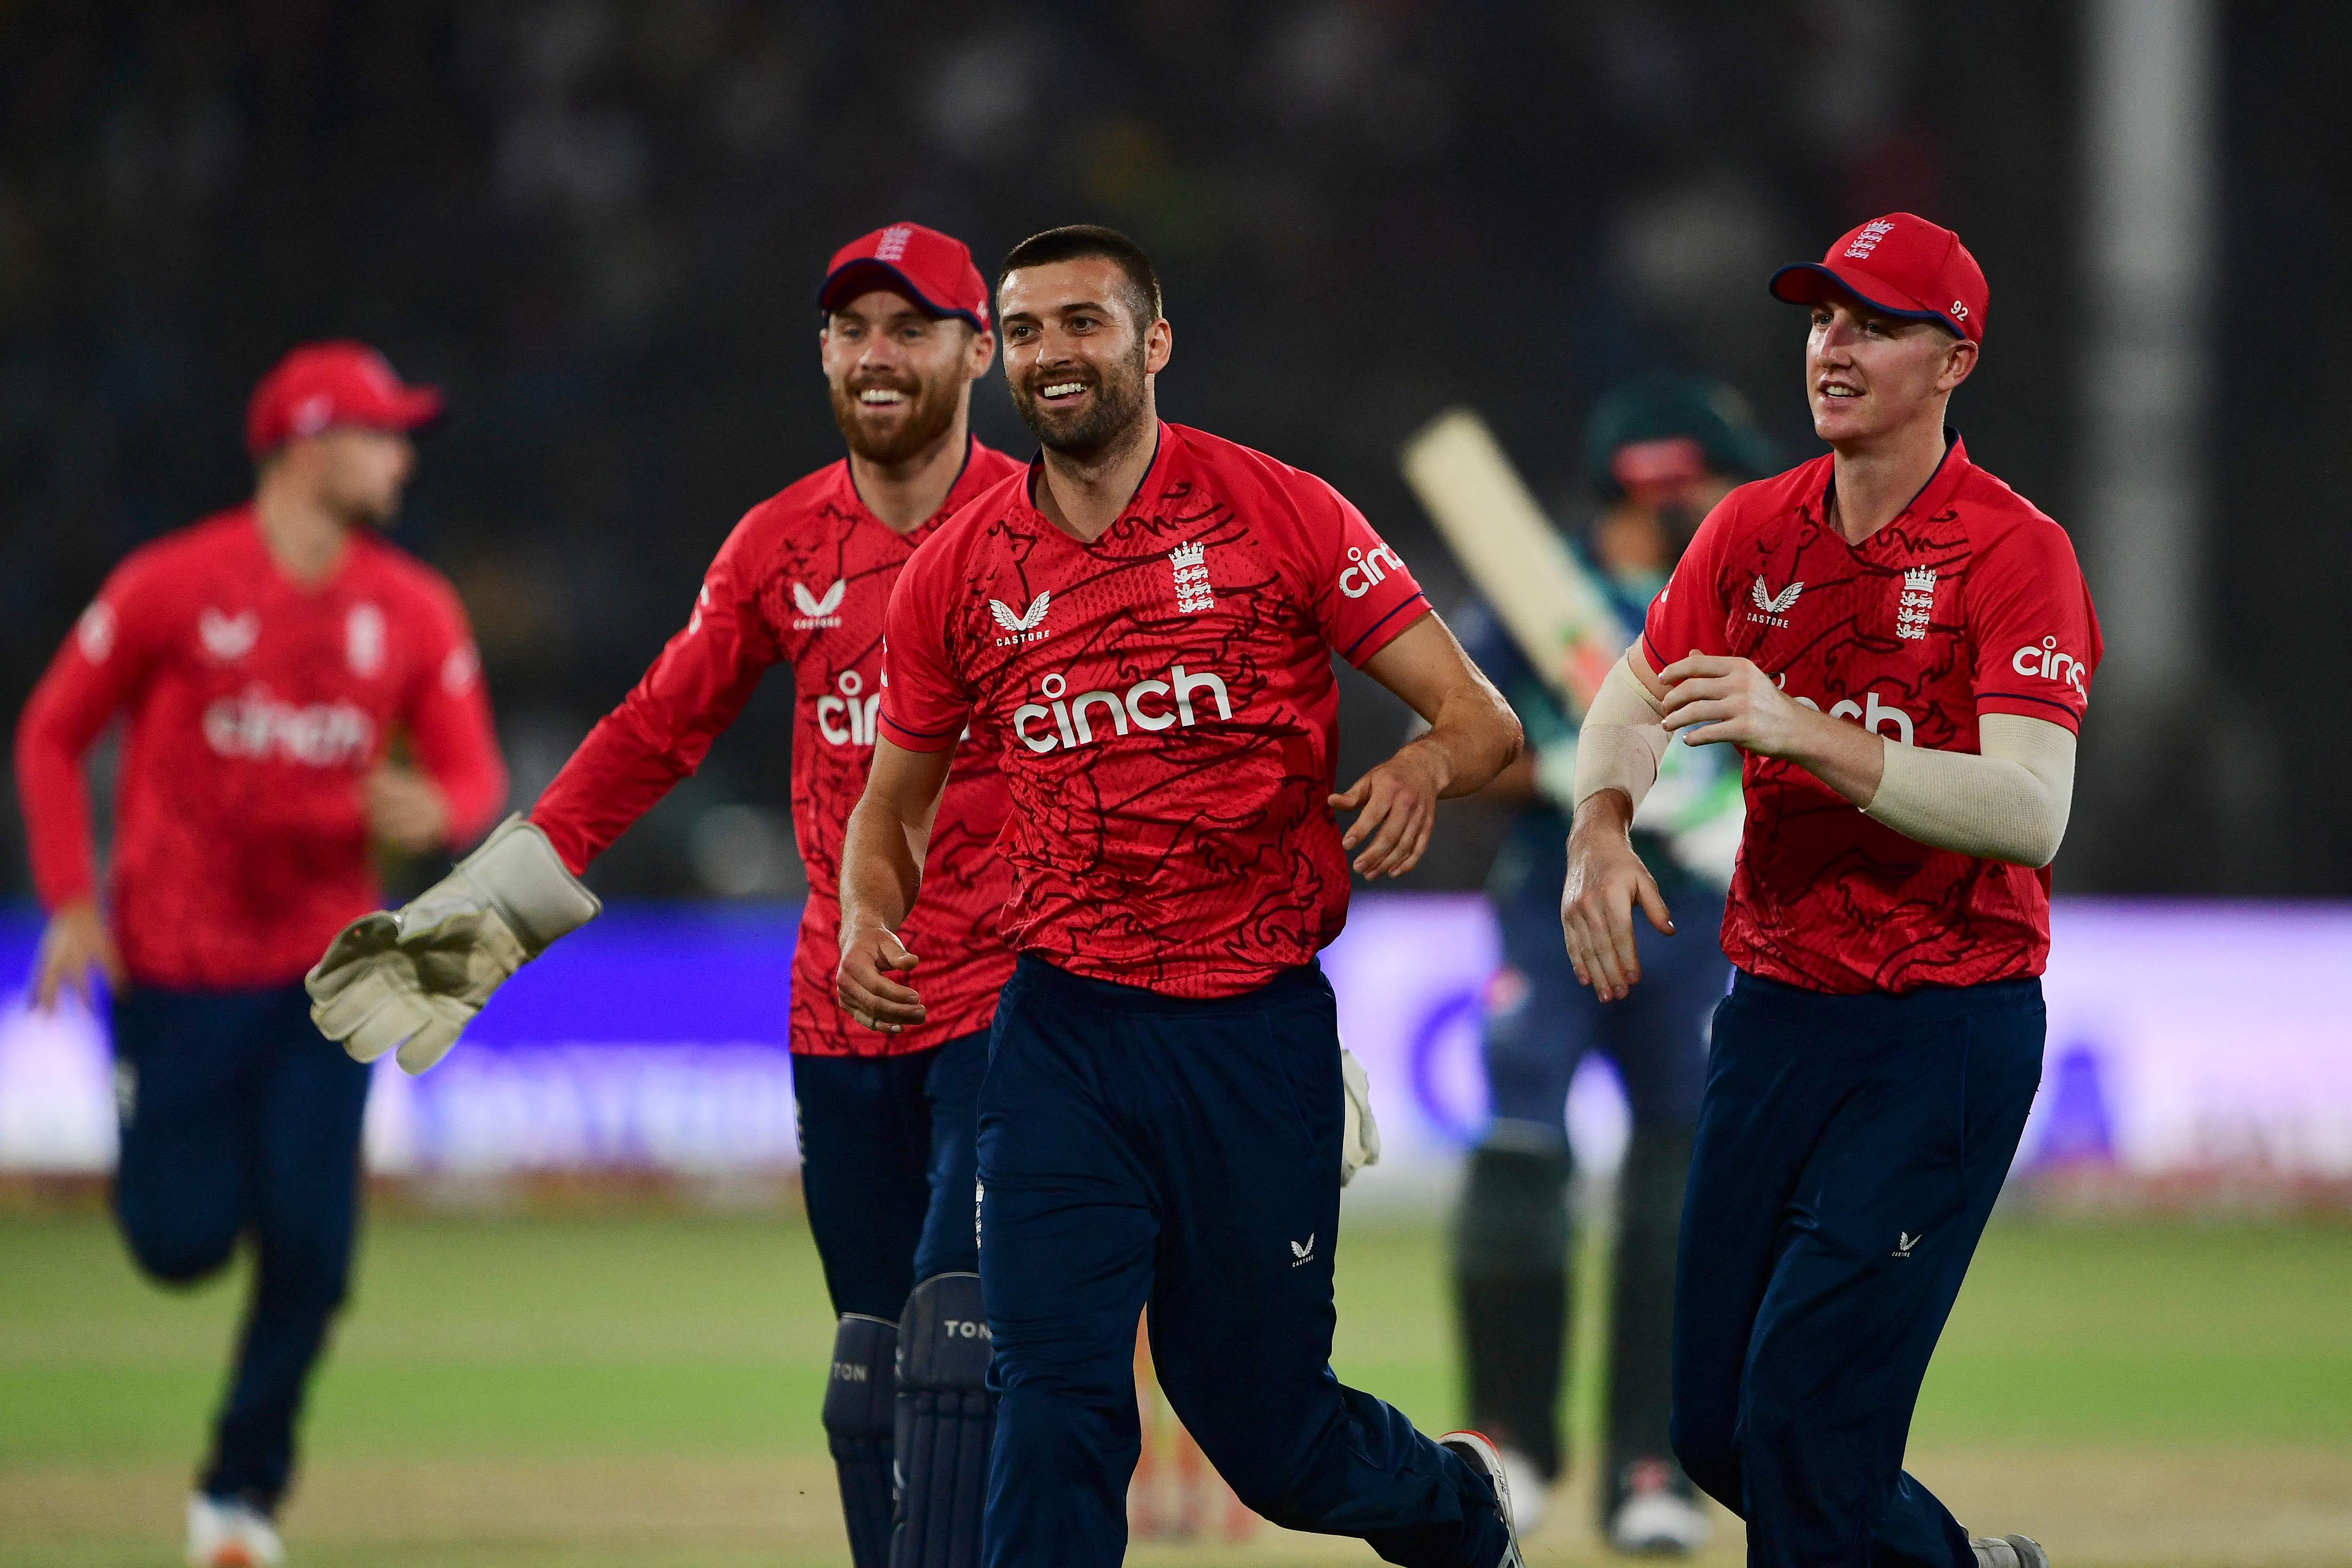 Mark Wood (centre) celebrates after taking the wicket of Pakistan’s captain Babar Azam